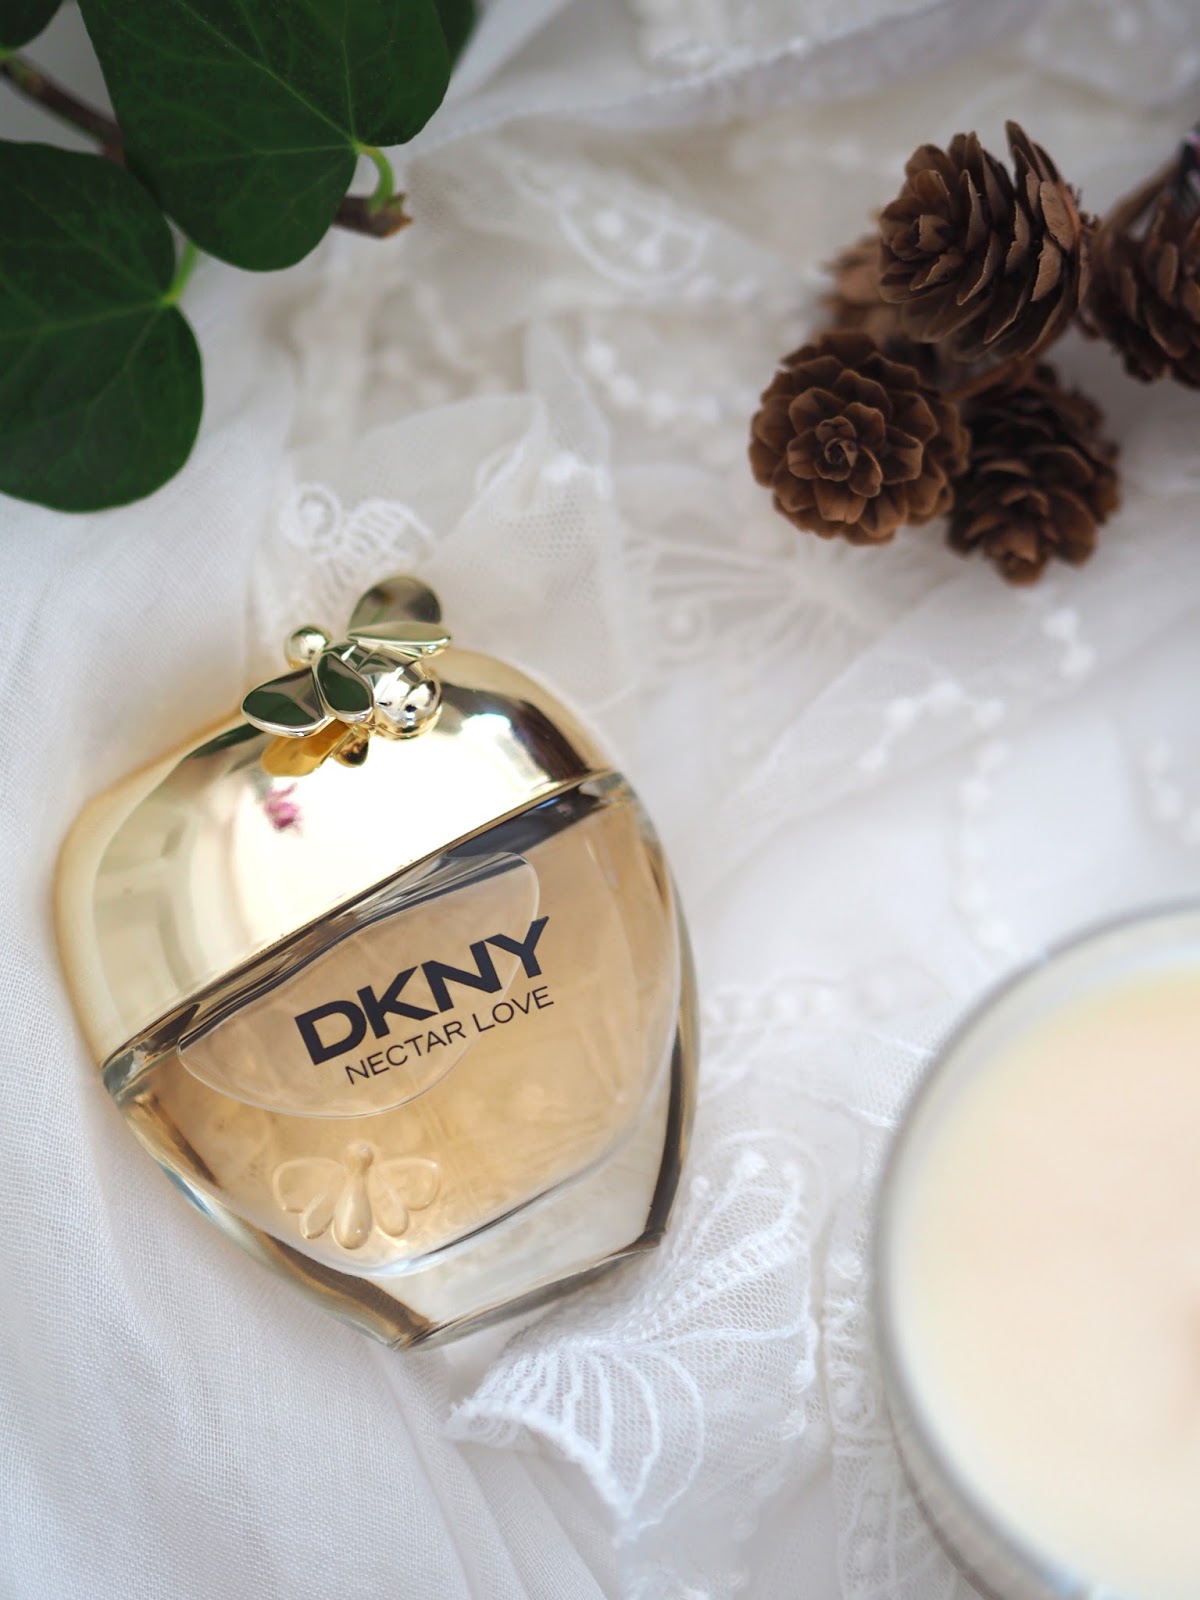 The Scented Gift Guide, Katie Kirk Loves, UK Blogger, Beauty Blogger, Christmas, Christmas Gifts, Gift Guide, Gift Ideas, Beauty Gifts, Lifestyle, Luxury Gifts, Charlotte Tilbury, Viktor & Rolf Flower Bomb, Debenhams Beauty, Lush Cosmetics, Oasis Fashion, Rose Gold, Yankee Candle, The Little Candle Co, So...? Perfume, Diptique, Jo Malone, Christmas Fragrances, Fragranced Gifts, Christmas Scents, Christmas Magic, The Perfect Tree, Crackling Wood Fire, Spiced White Cocoa, Christmas Giveaway, Candle Giveaway, Monsoon Rose Gold Perfume